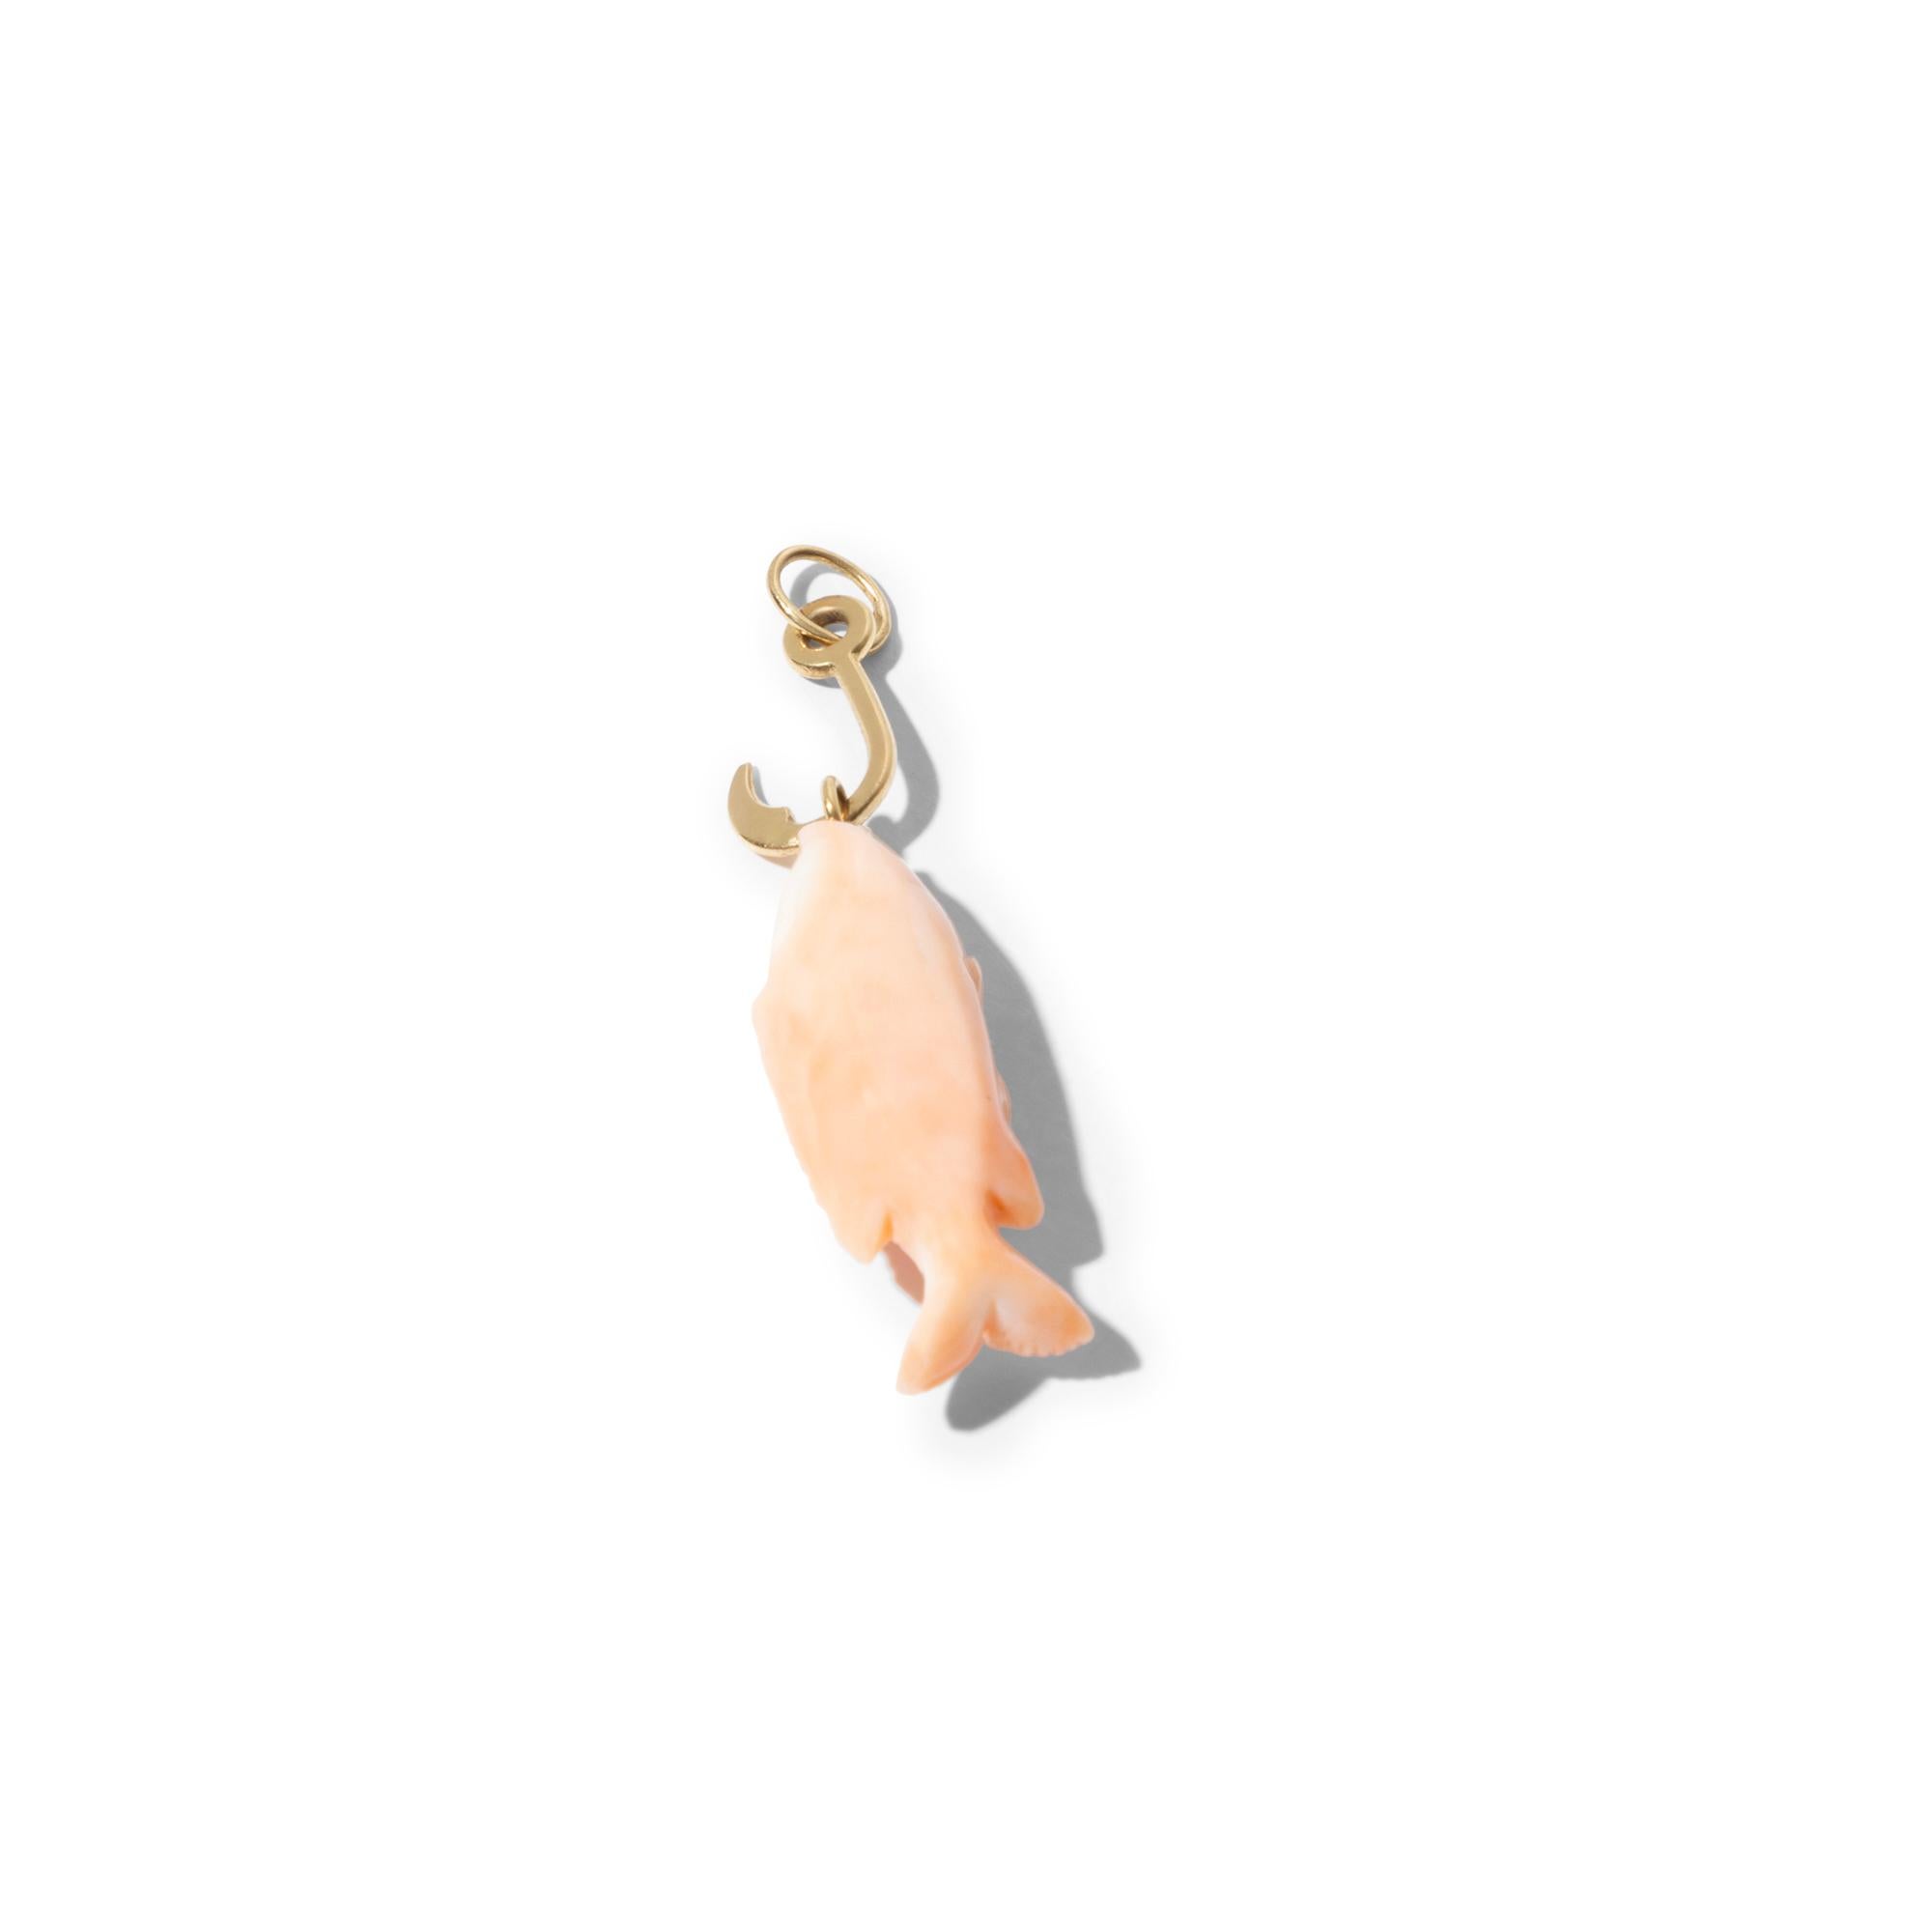 Uncut 18k Gold Fish Pendant from Hand Carved Coral on Hook For Sale